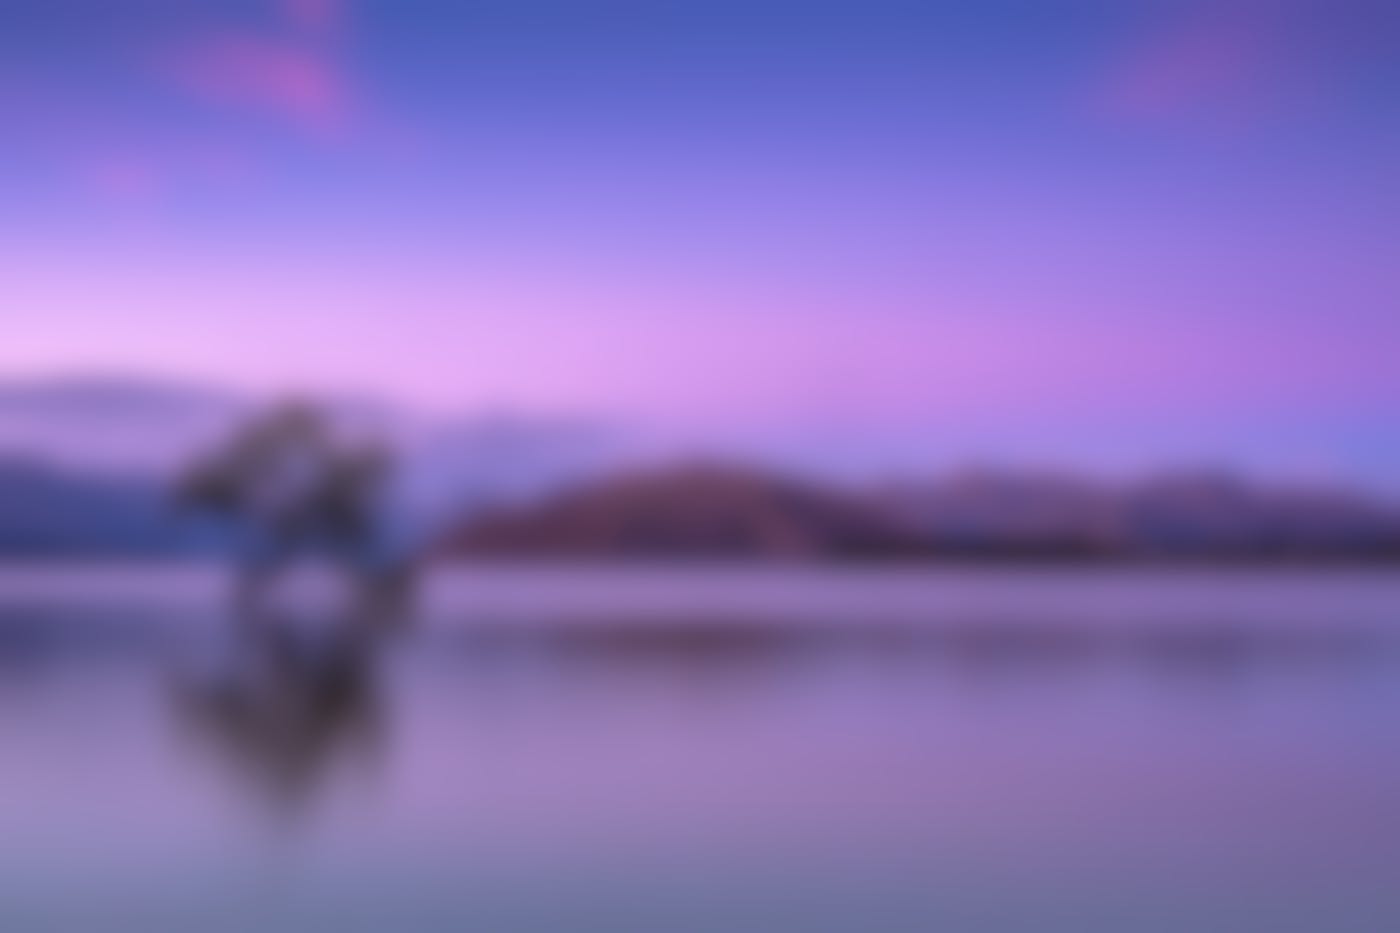 a tree growing from a lake with a sky tinged with purple and blue